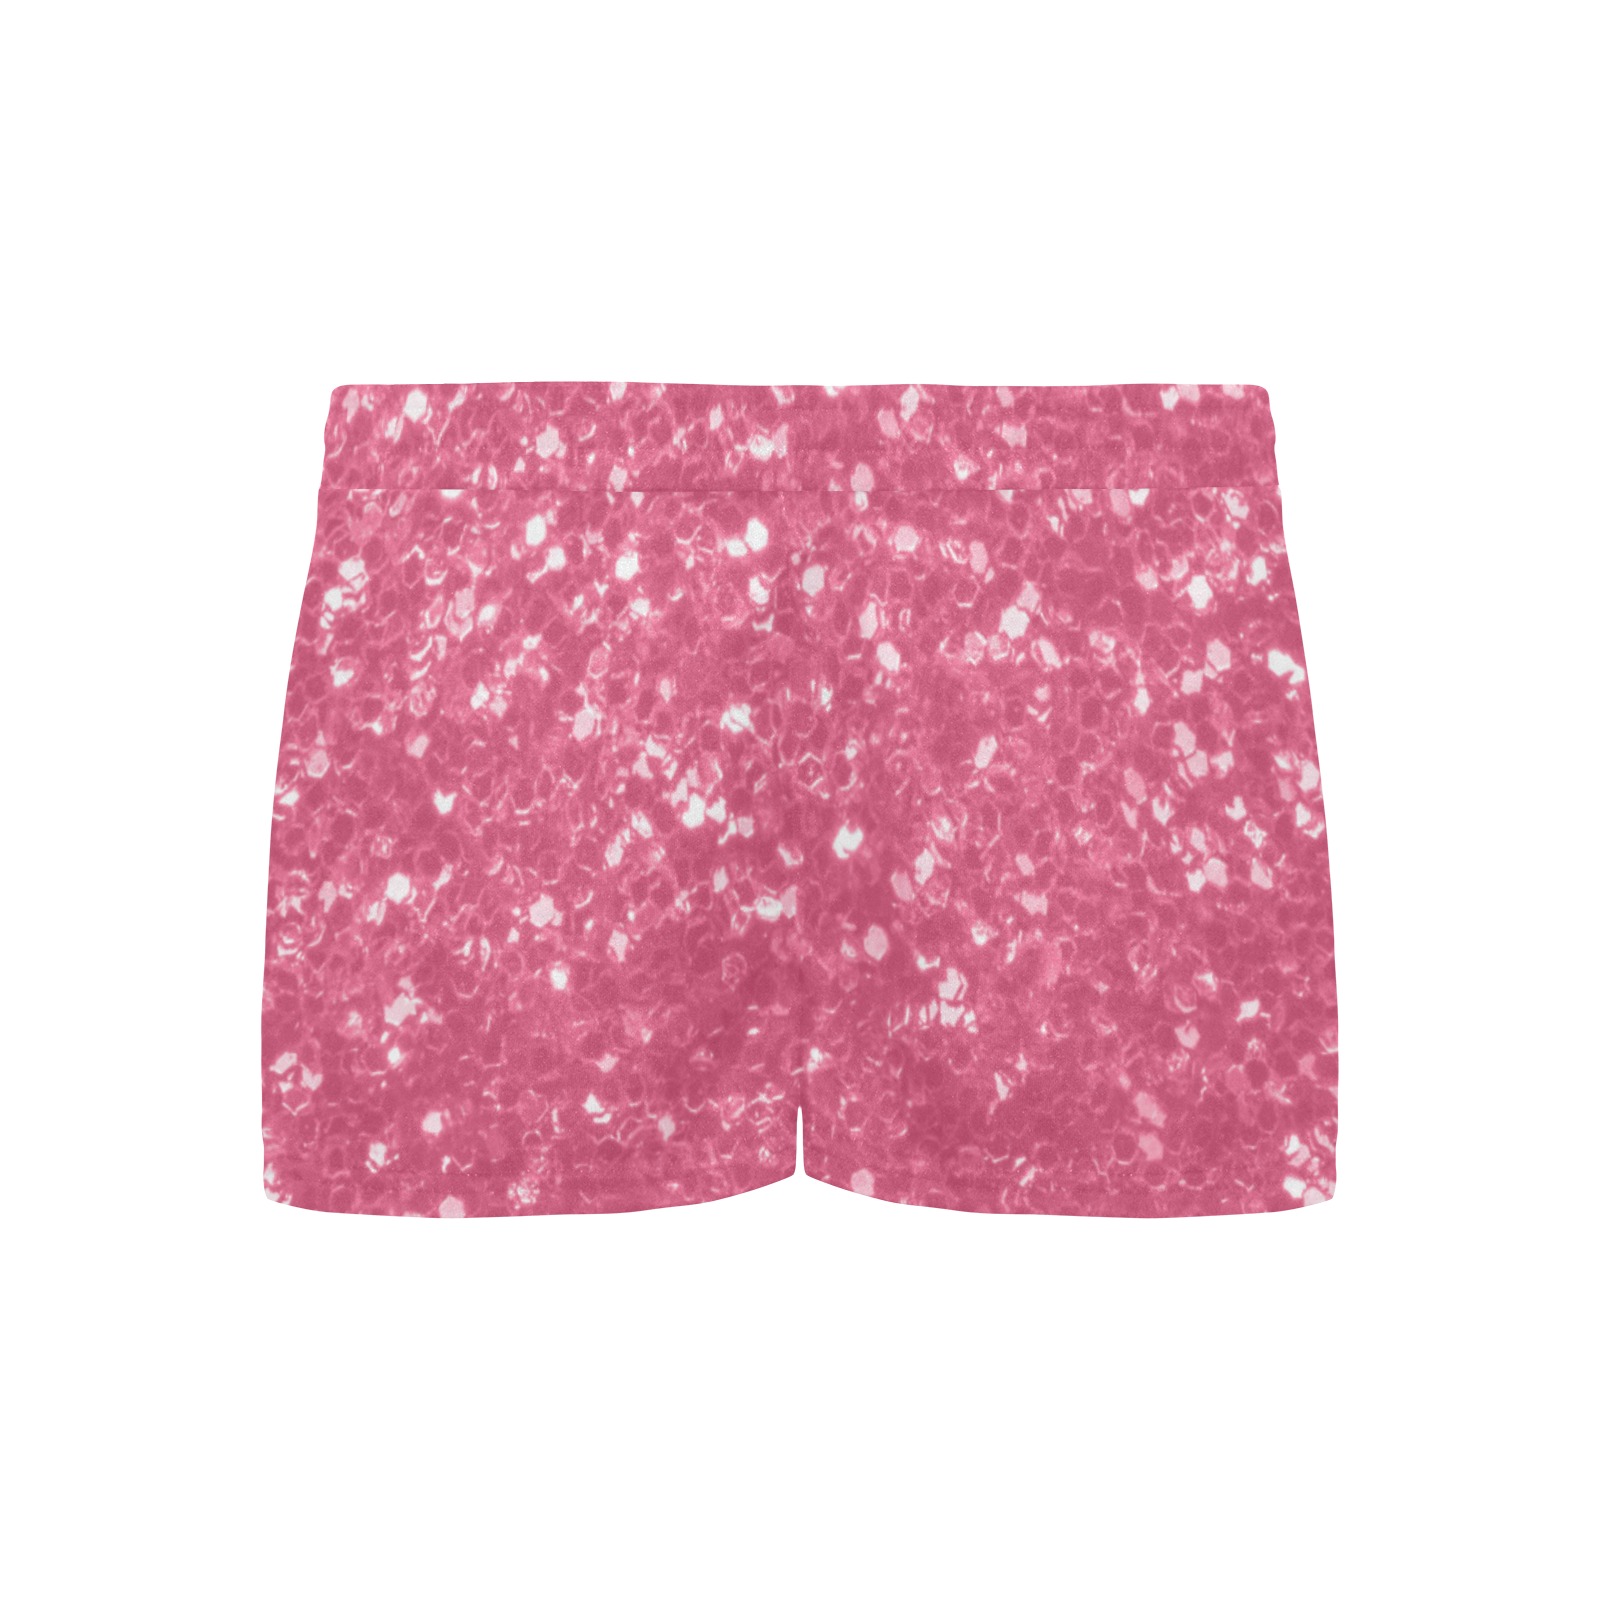 Magenta light pink red faux sparkles glitter Women's Pajama Shorts